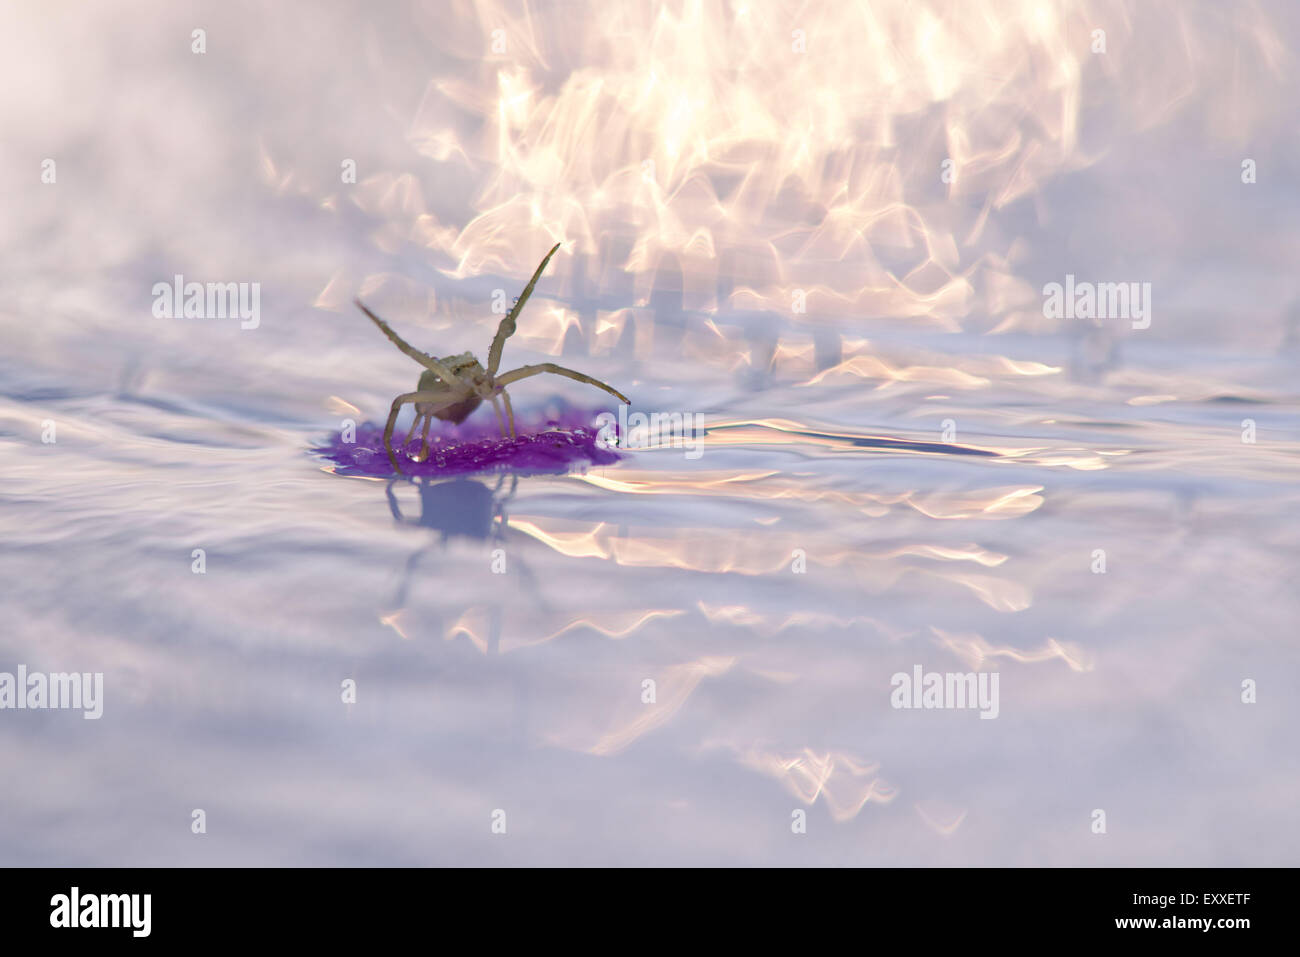 Spider floating on debris in water Stock Photo